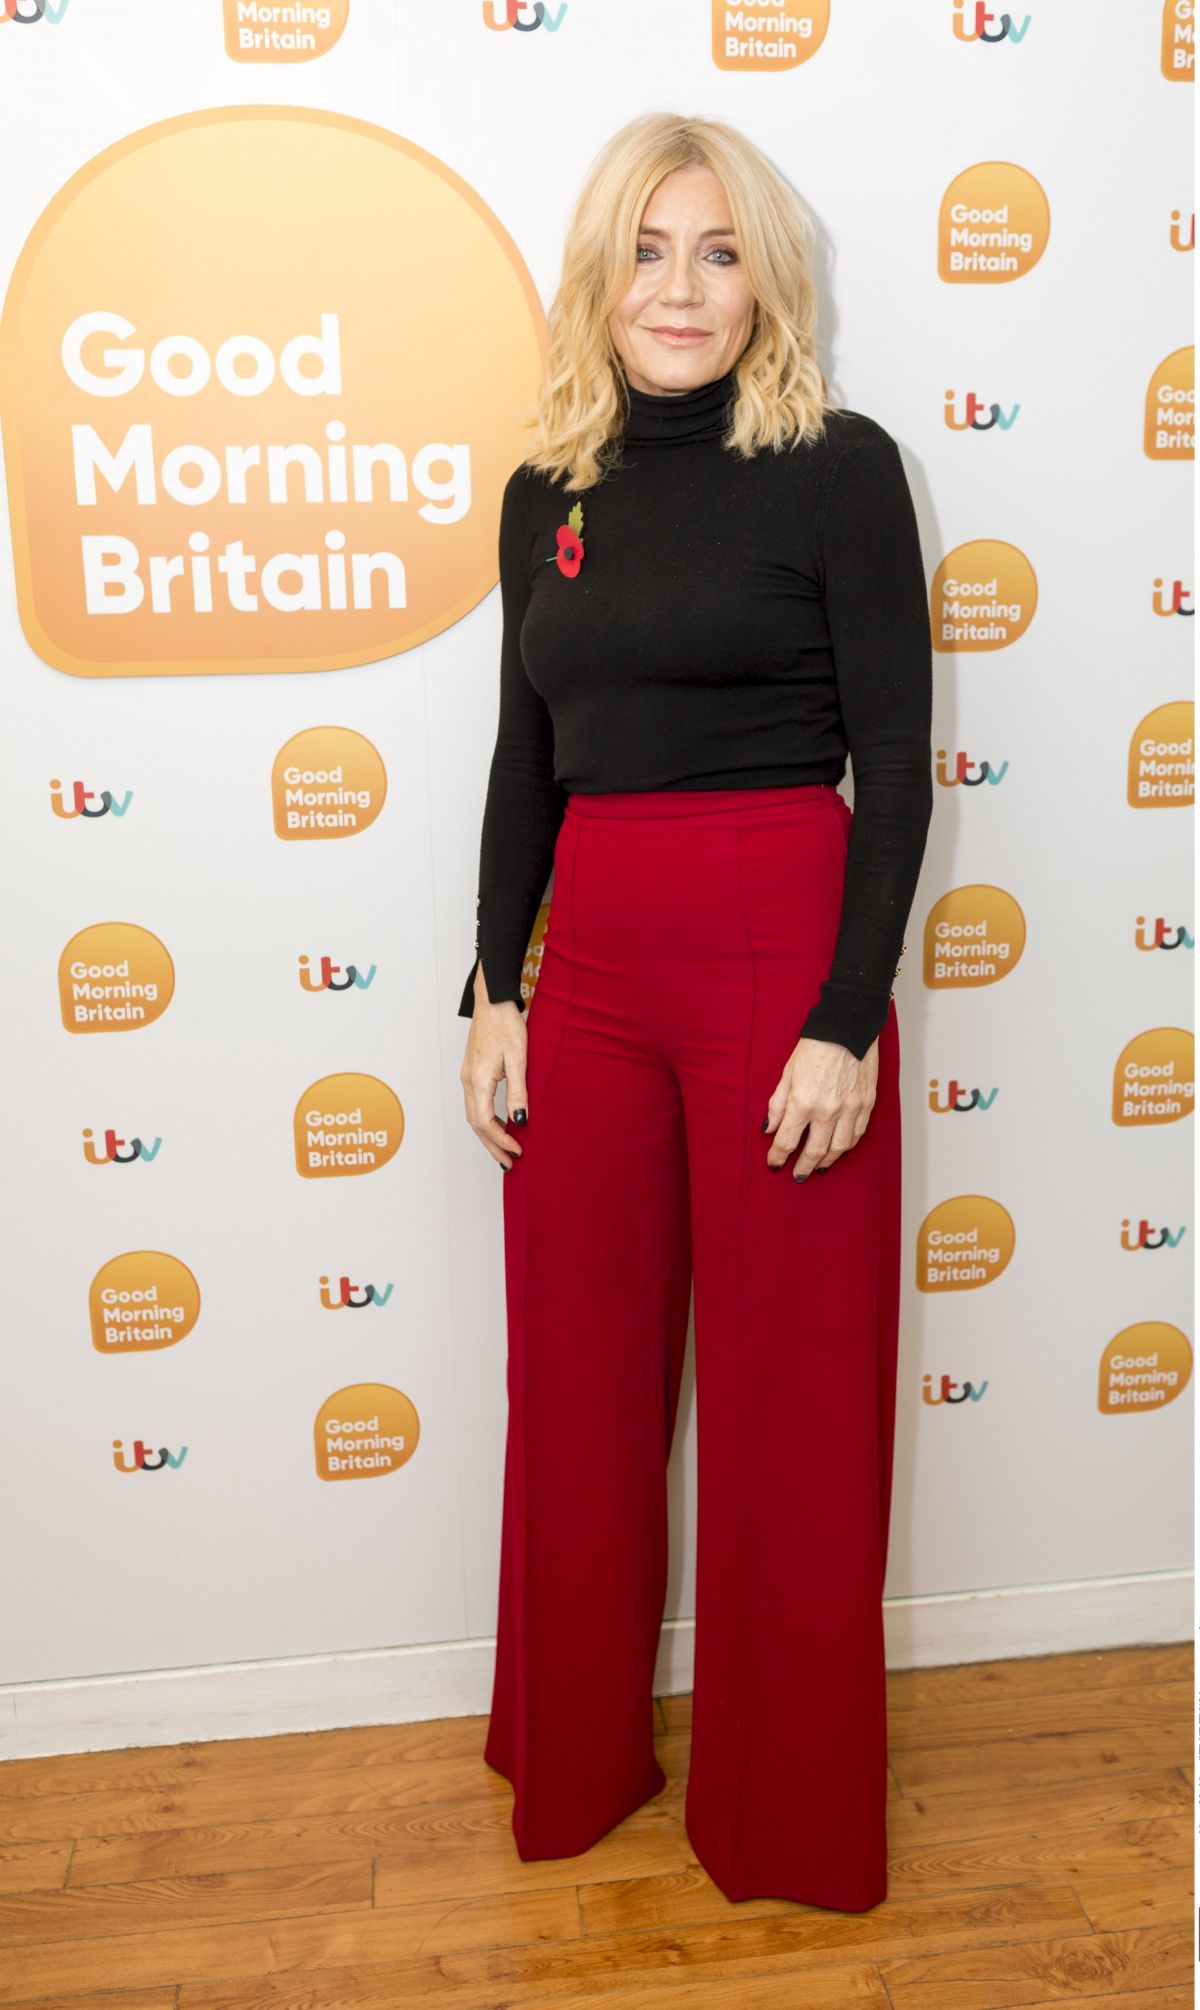 MICHELLE COLLINS at God Morning Britain in London 10/27/2017 – HawtCelebs